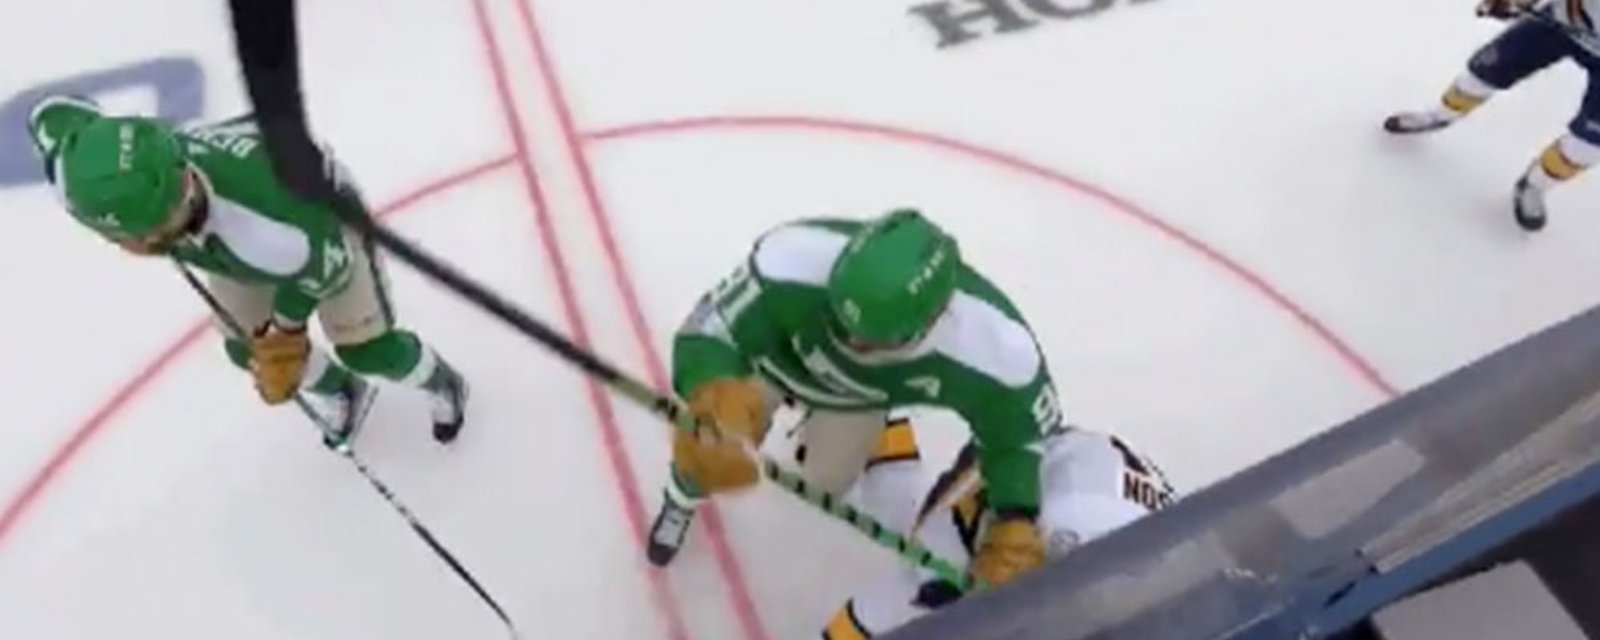 Seguin delivers a dirty hit from behind on Watson